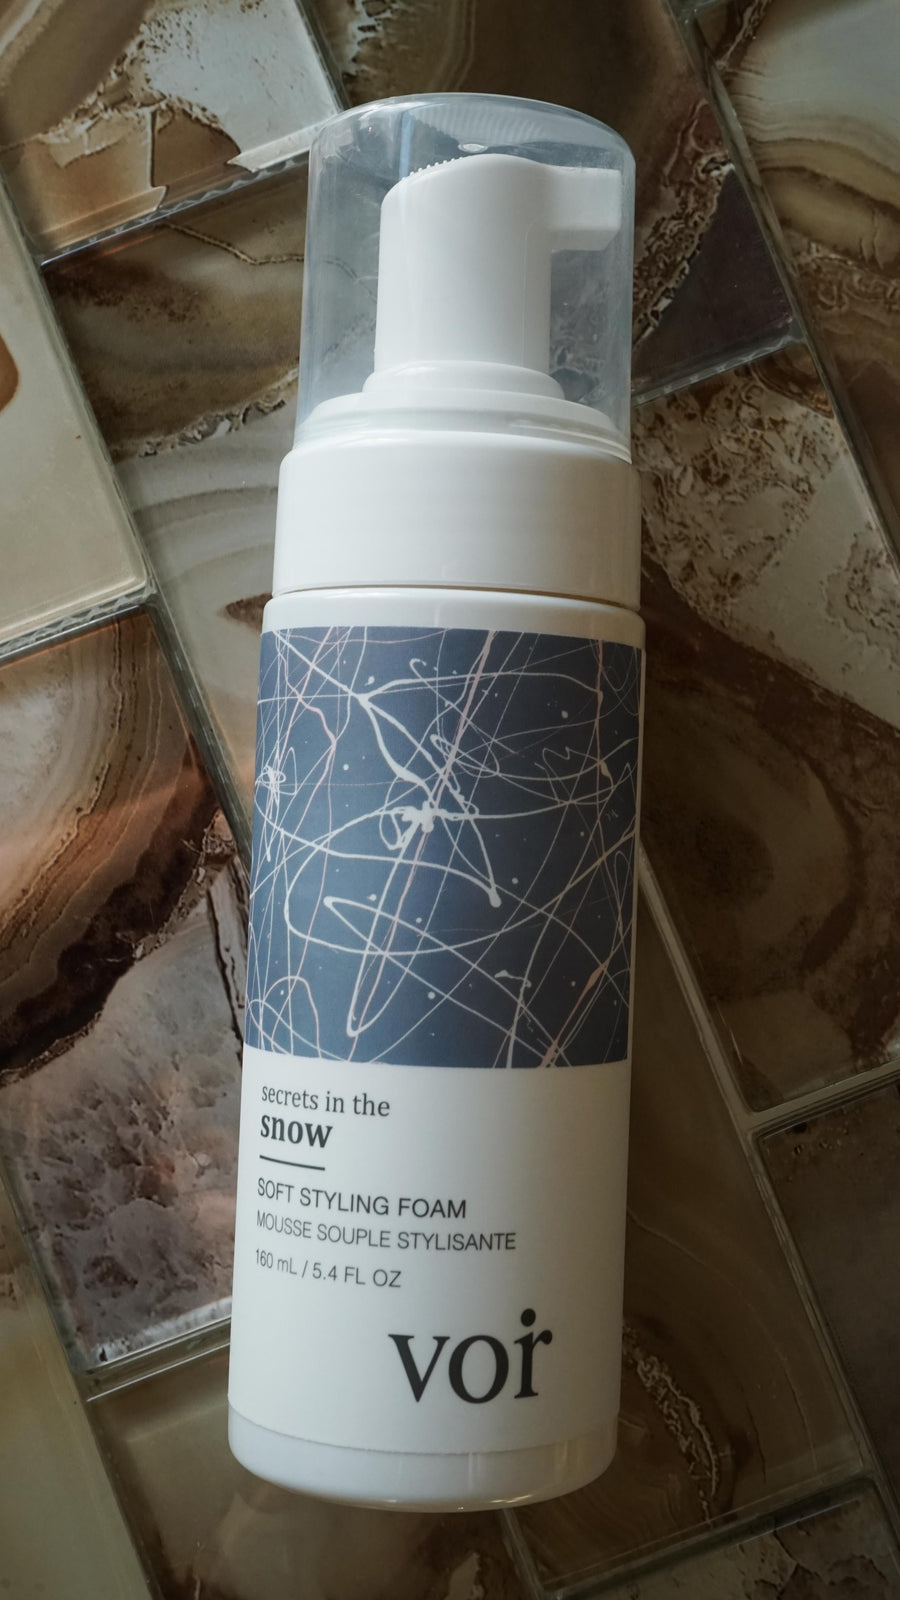 Secrets in the Snow Soft Styling Foam by Voir Haircare